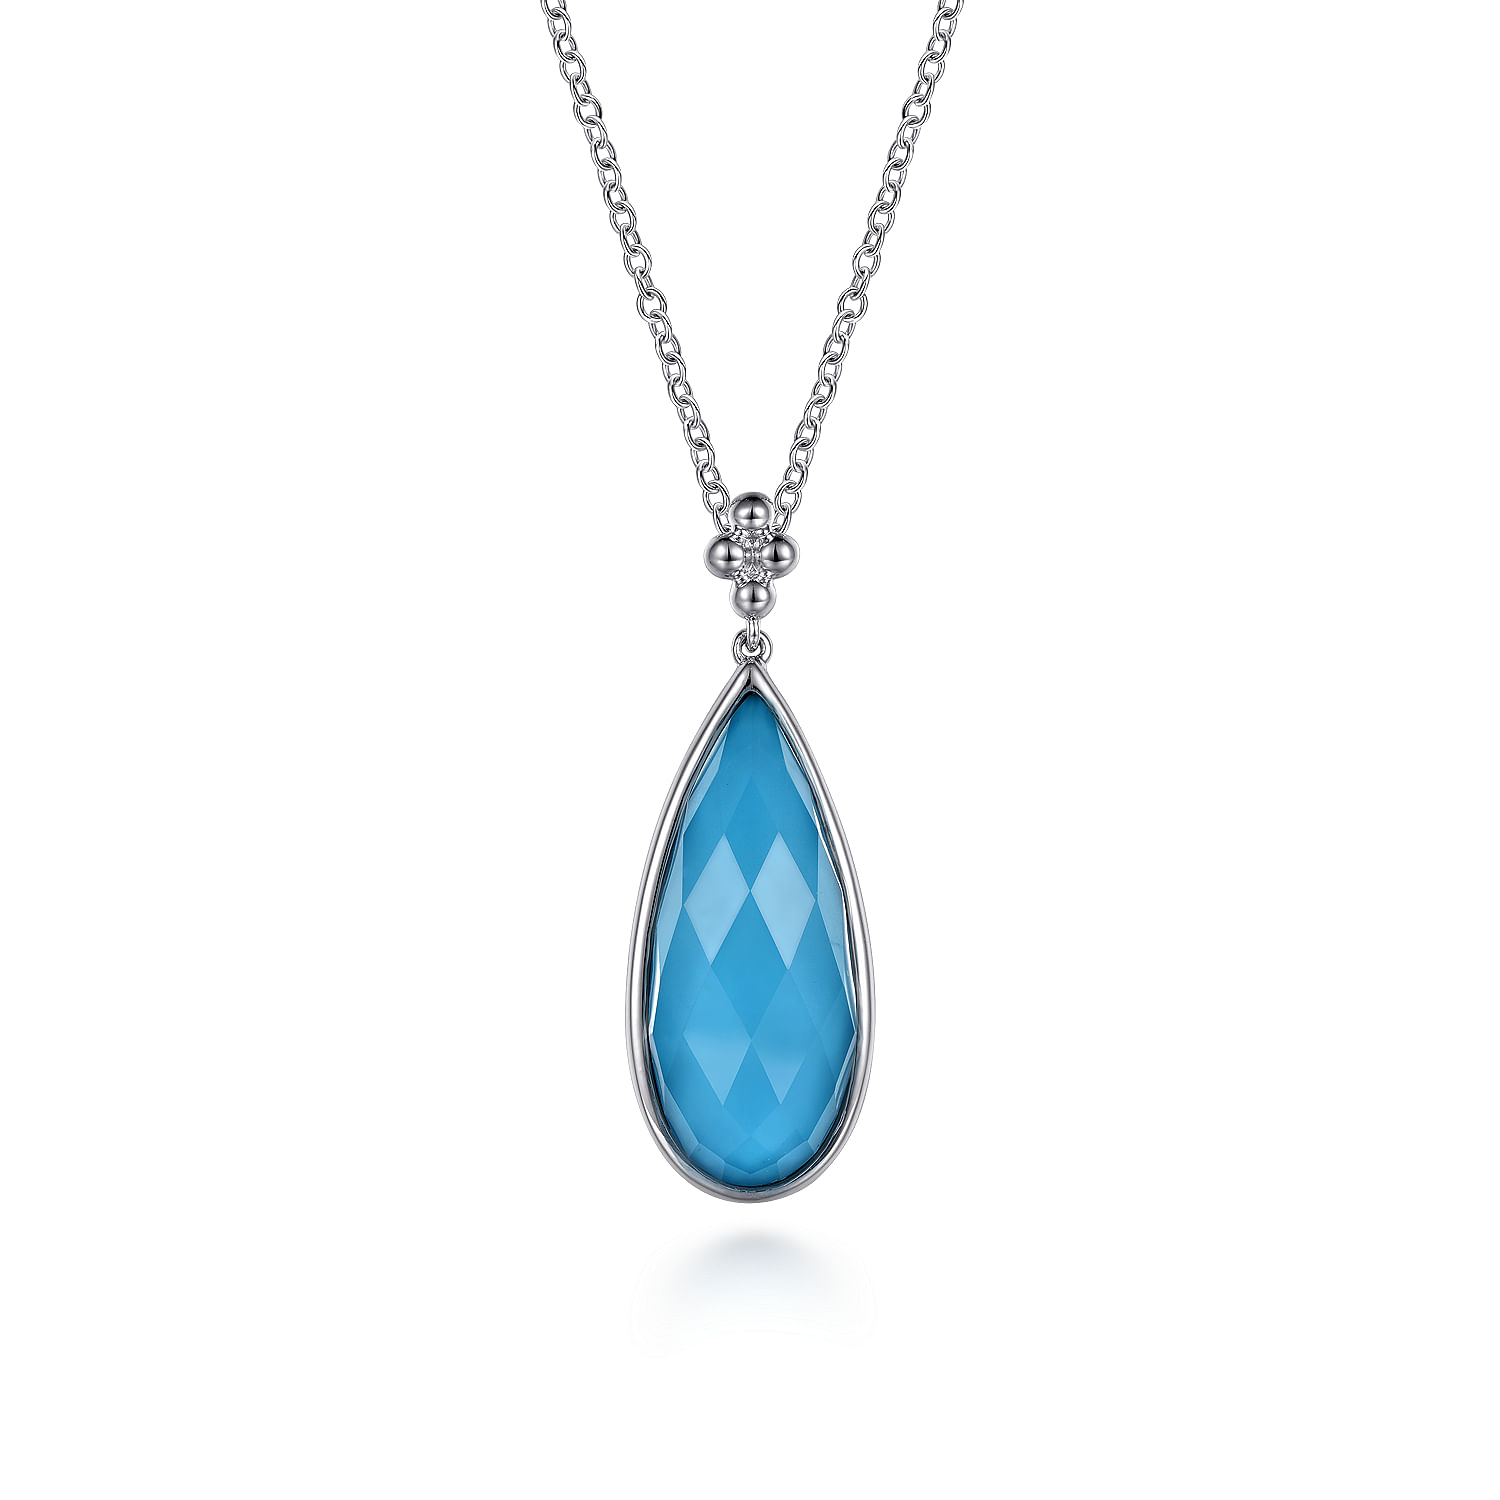 24 inch 925 Sterling Silver  Faceted Swiss Blue Topaz Bujukan Necklace in Pear Shape